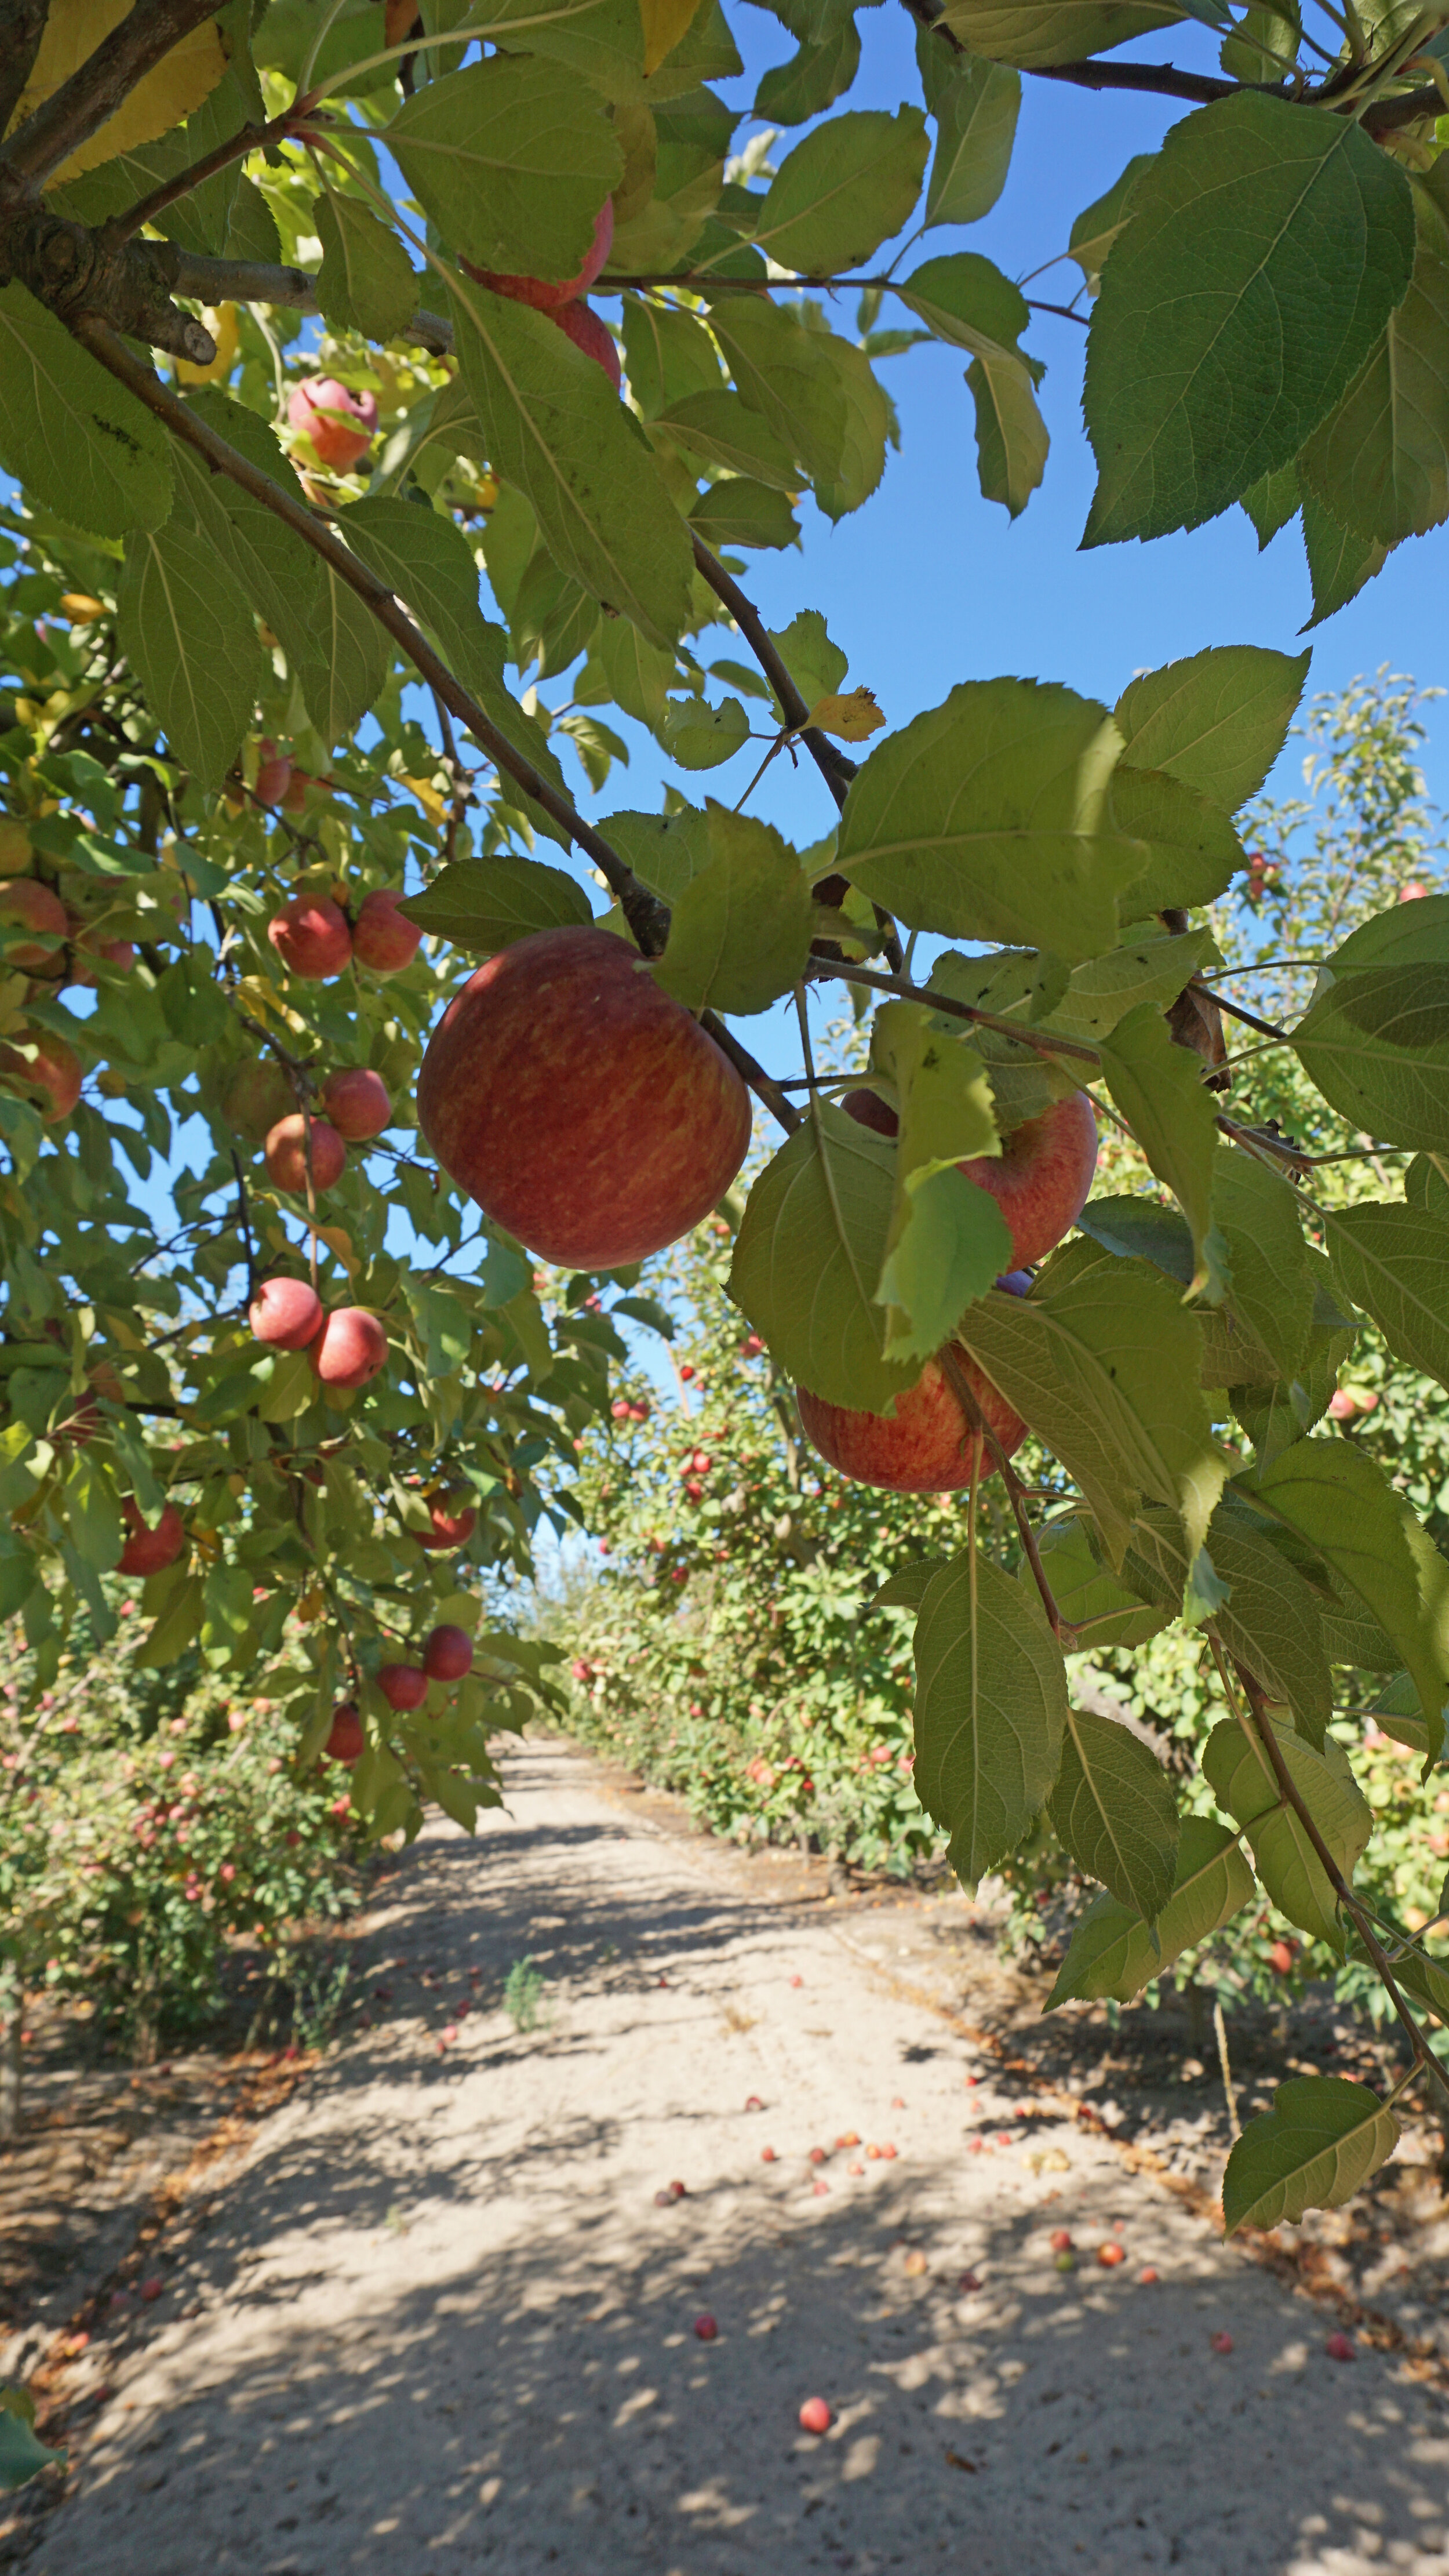 apples-and-orchard-vertical.jpg